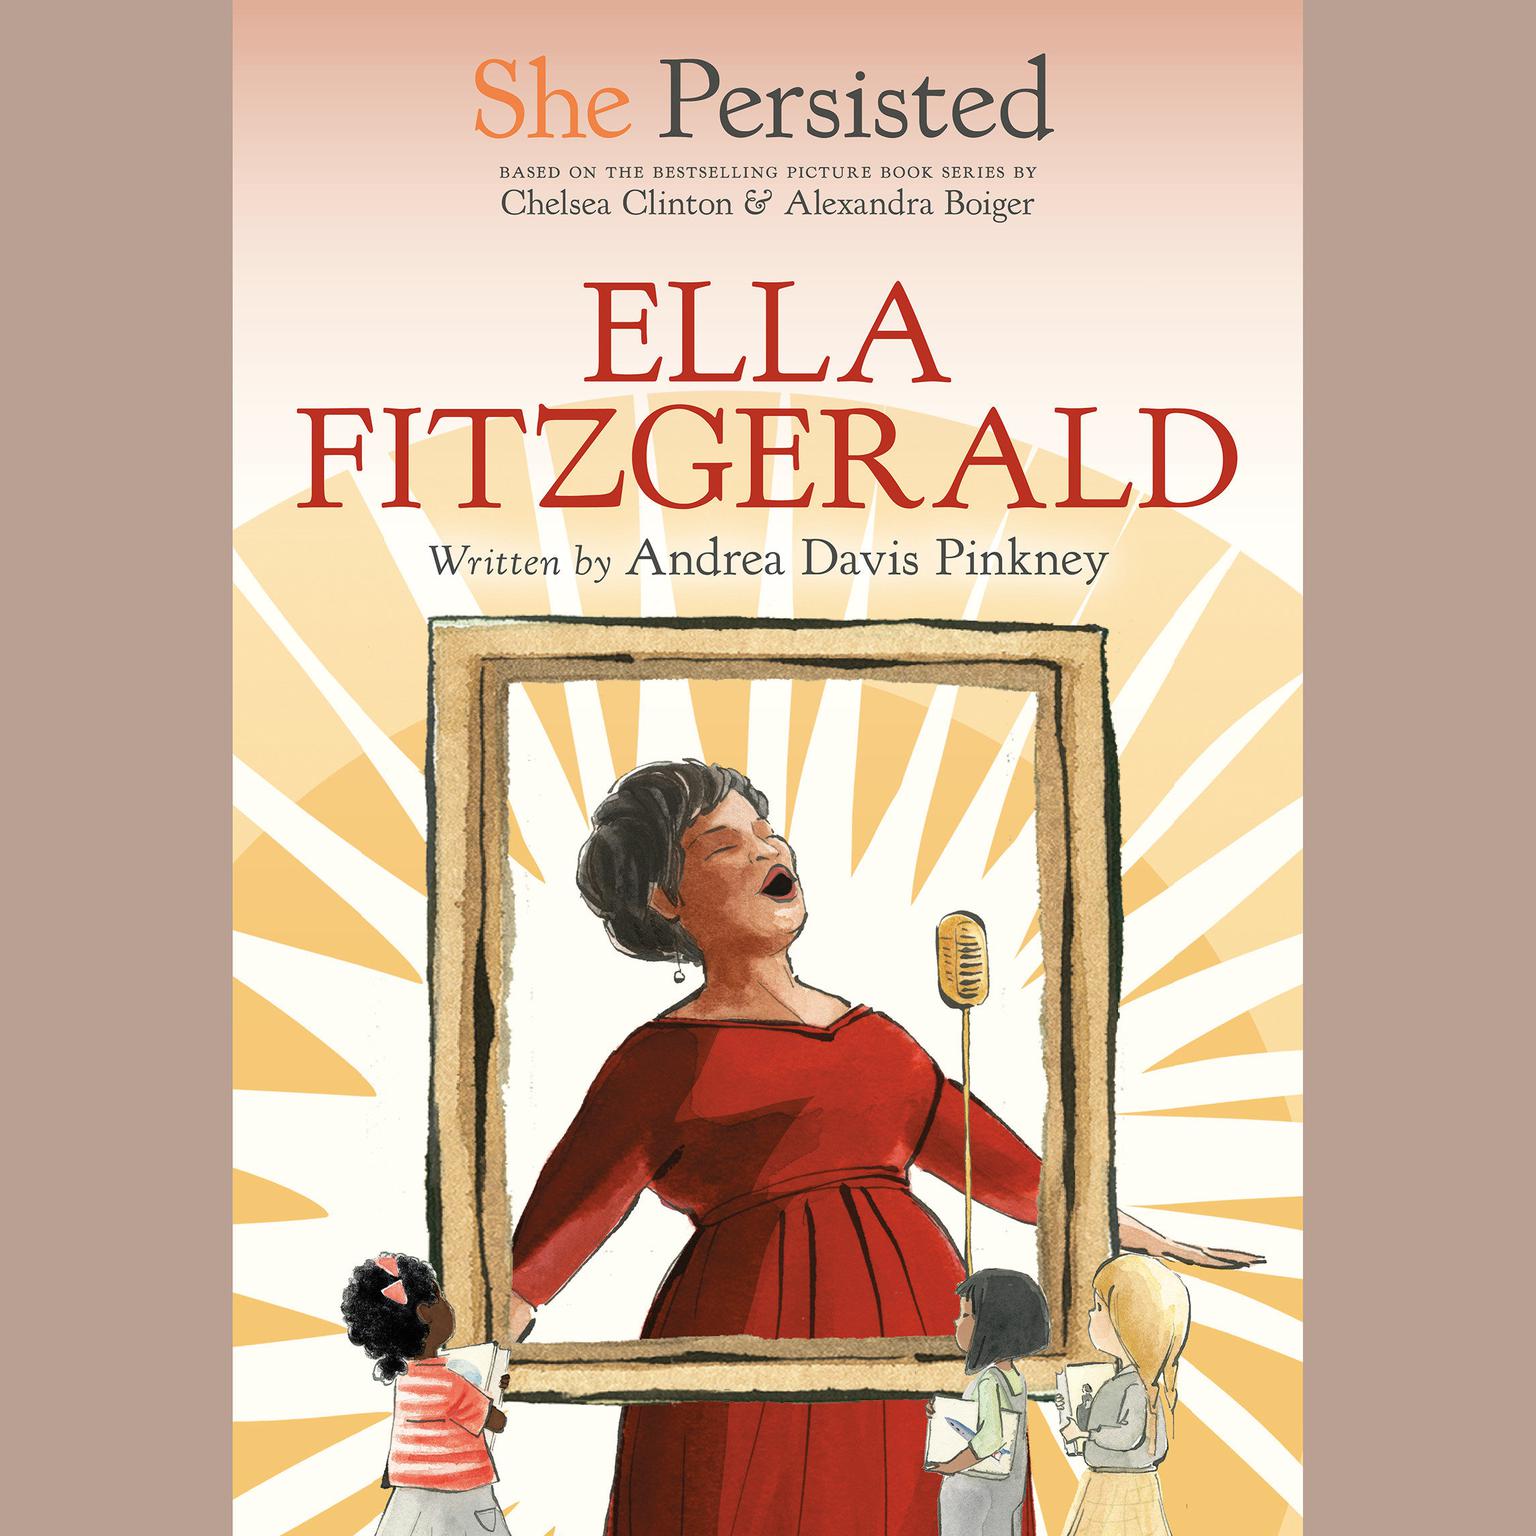 She Persisted: Ella Fitzgerald Audiobook, by Andrea Davis Pinkney